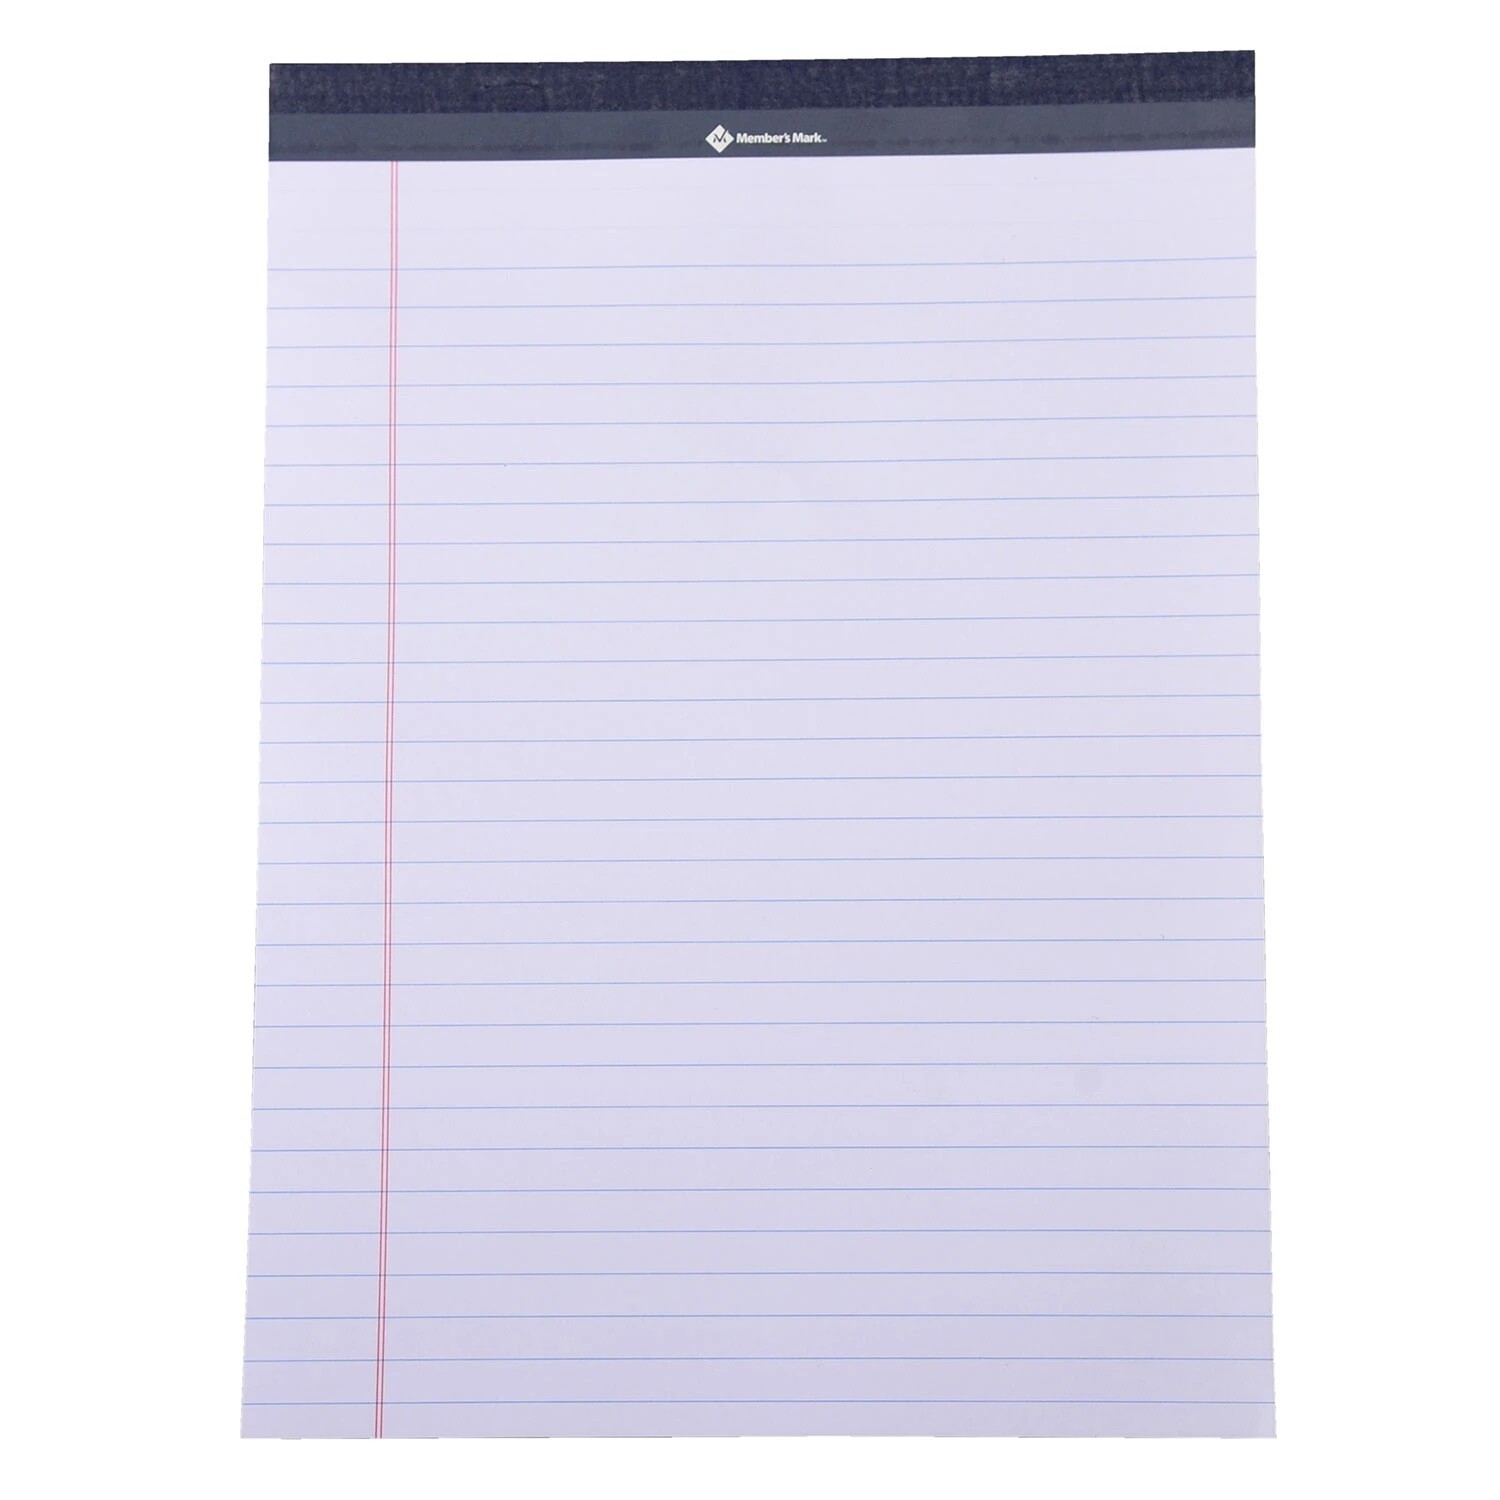 Writing Pad - white letter sized 50ct